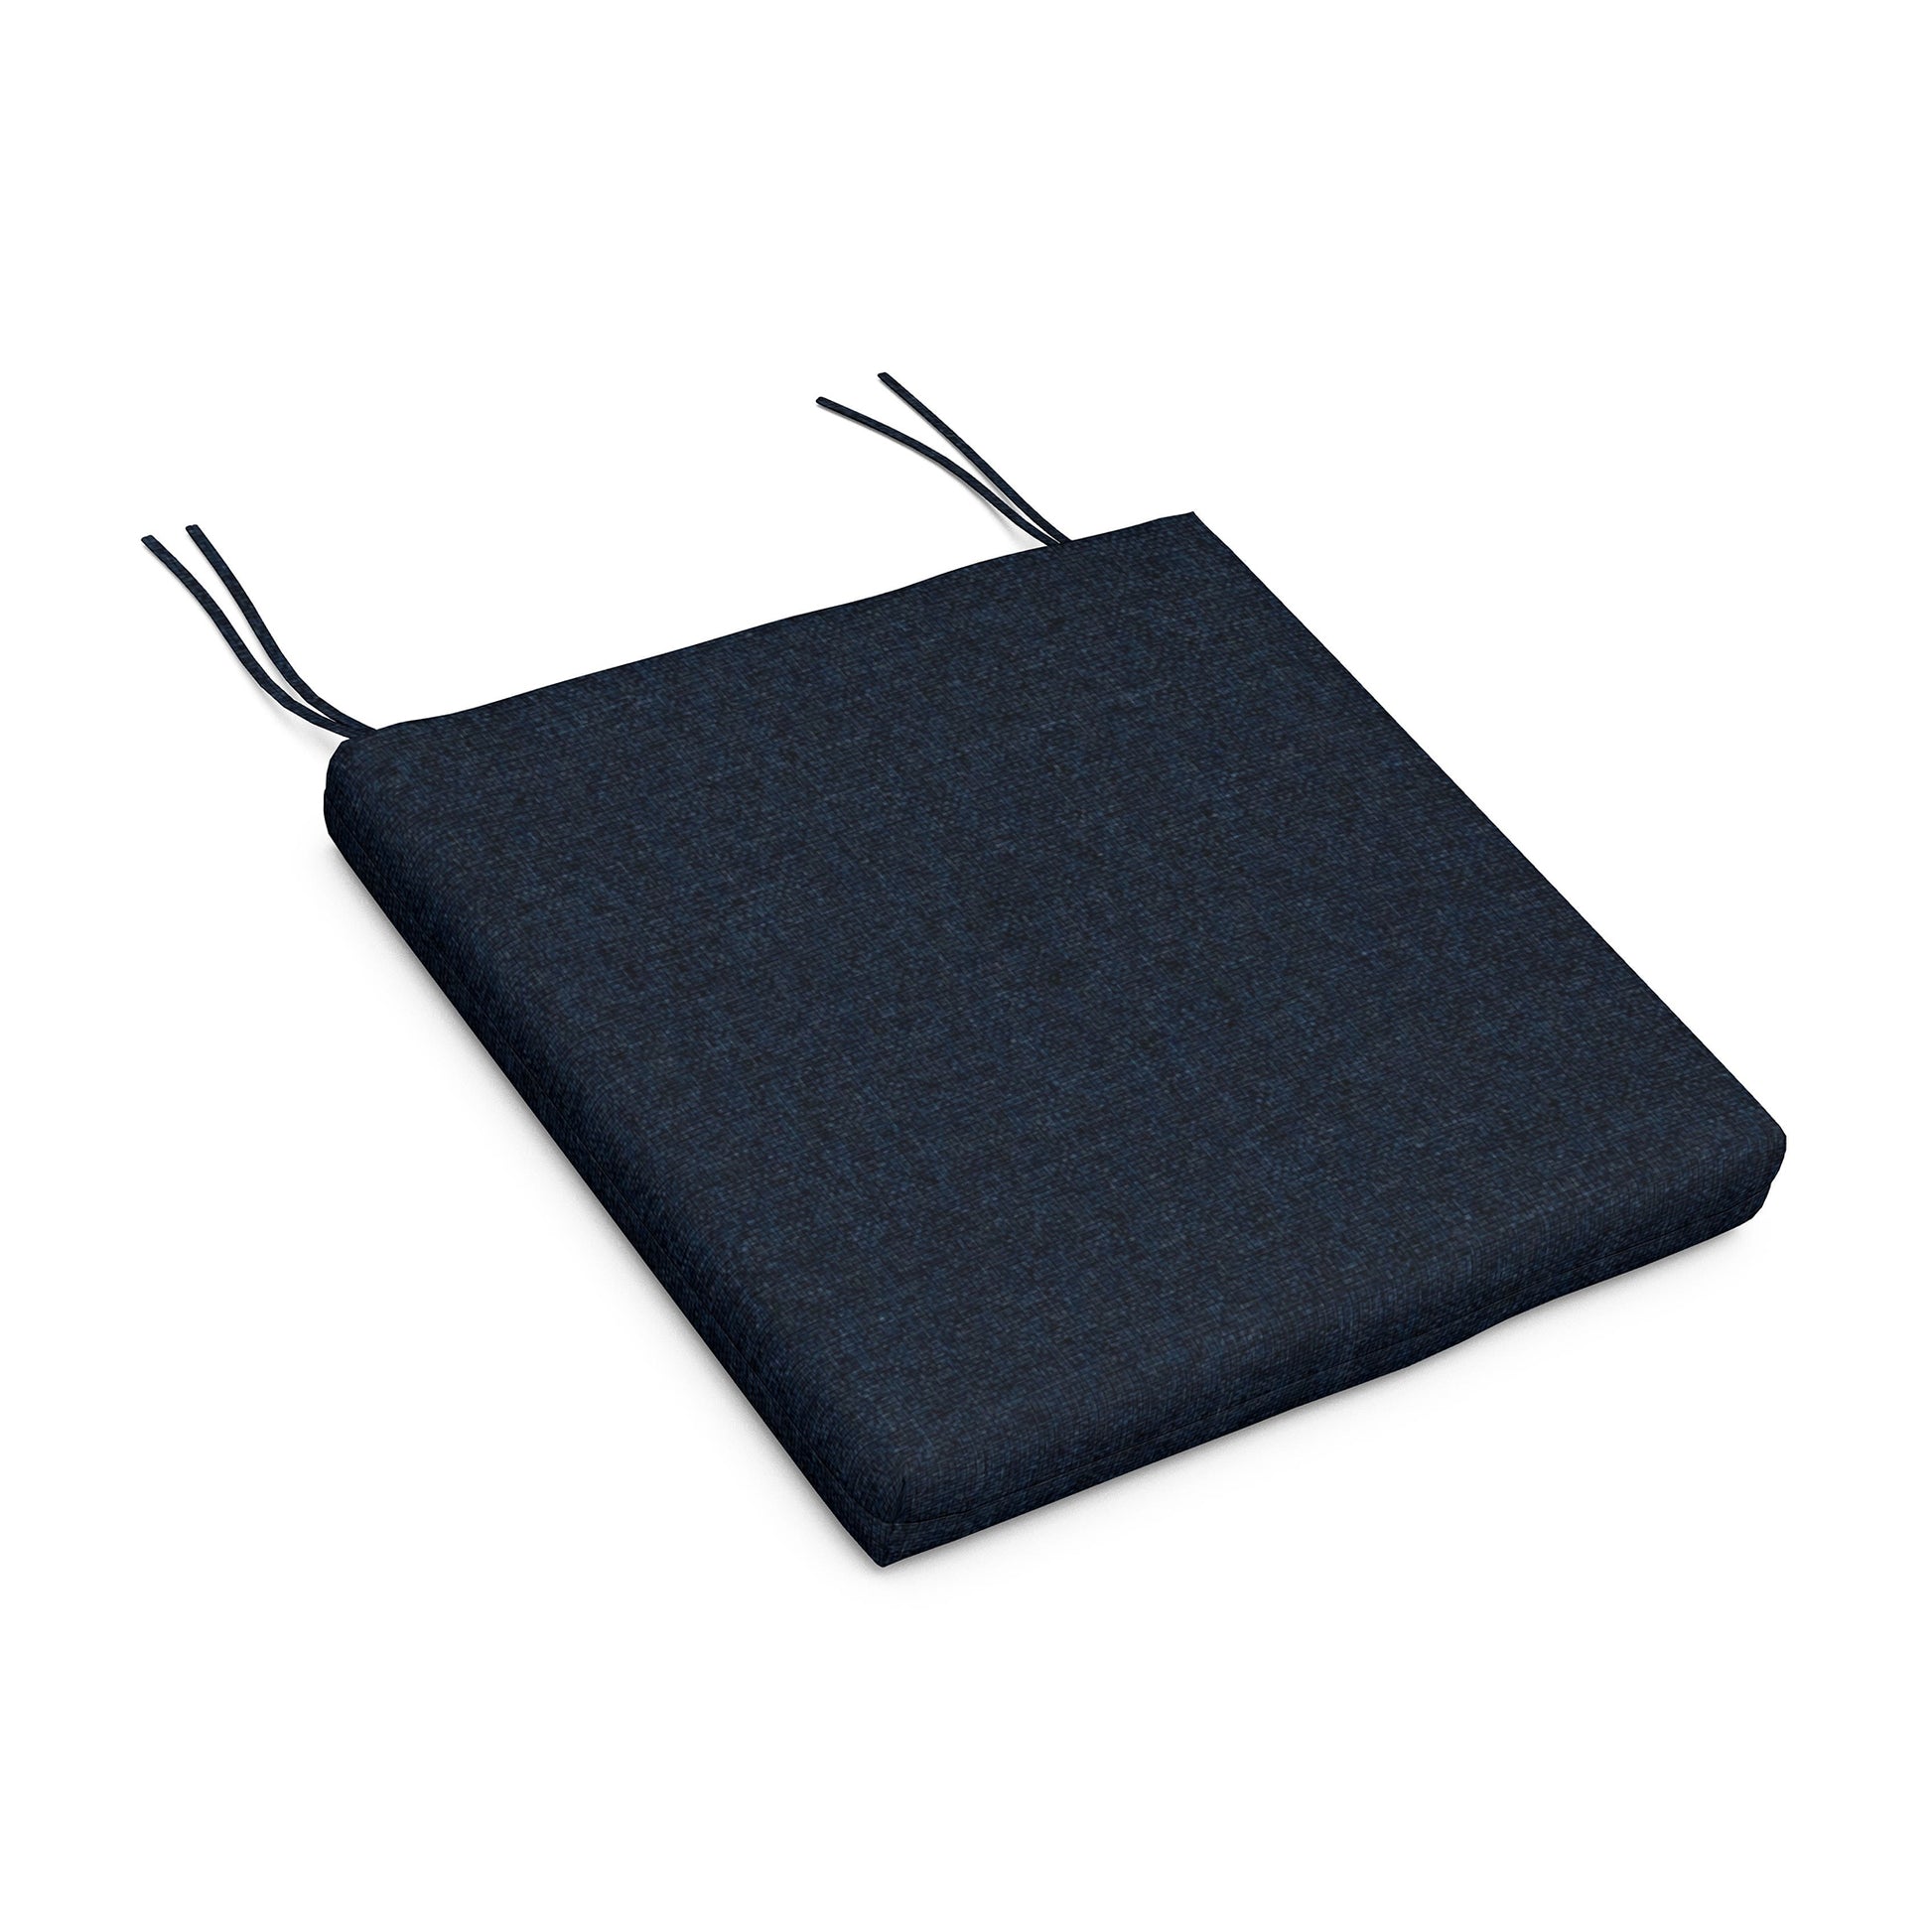 A simple navy blue XPWS0008 - Seat Cushion with two black tie strings visible, made from weather-resistant upholstery fabric, isolated on a white background. The texture appears slightly coarse and the cushion looks thick for comfort. Brand Name: POLYWOOD